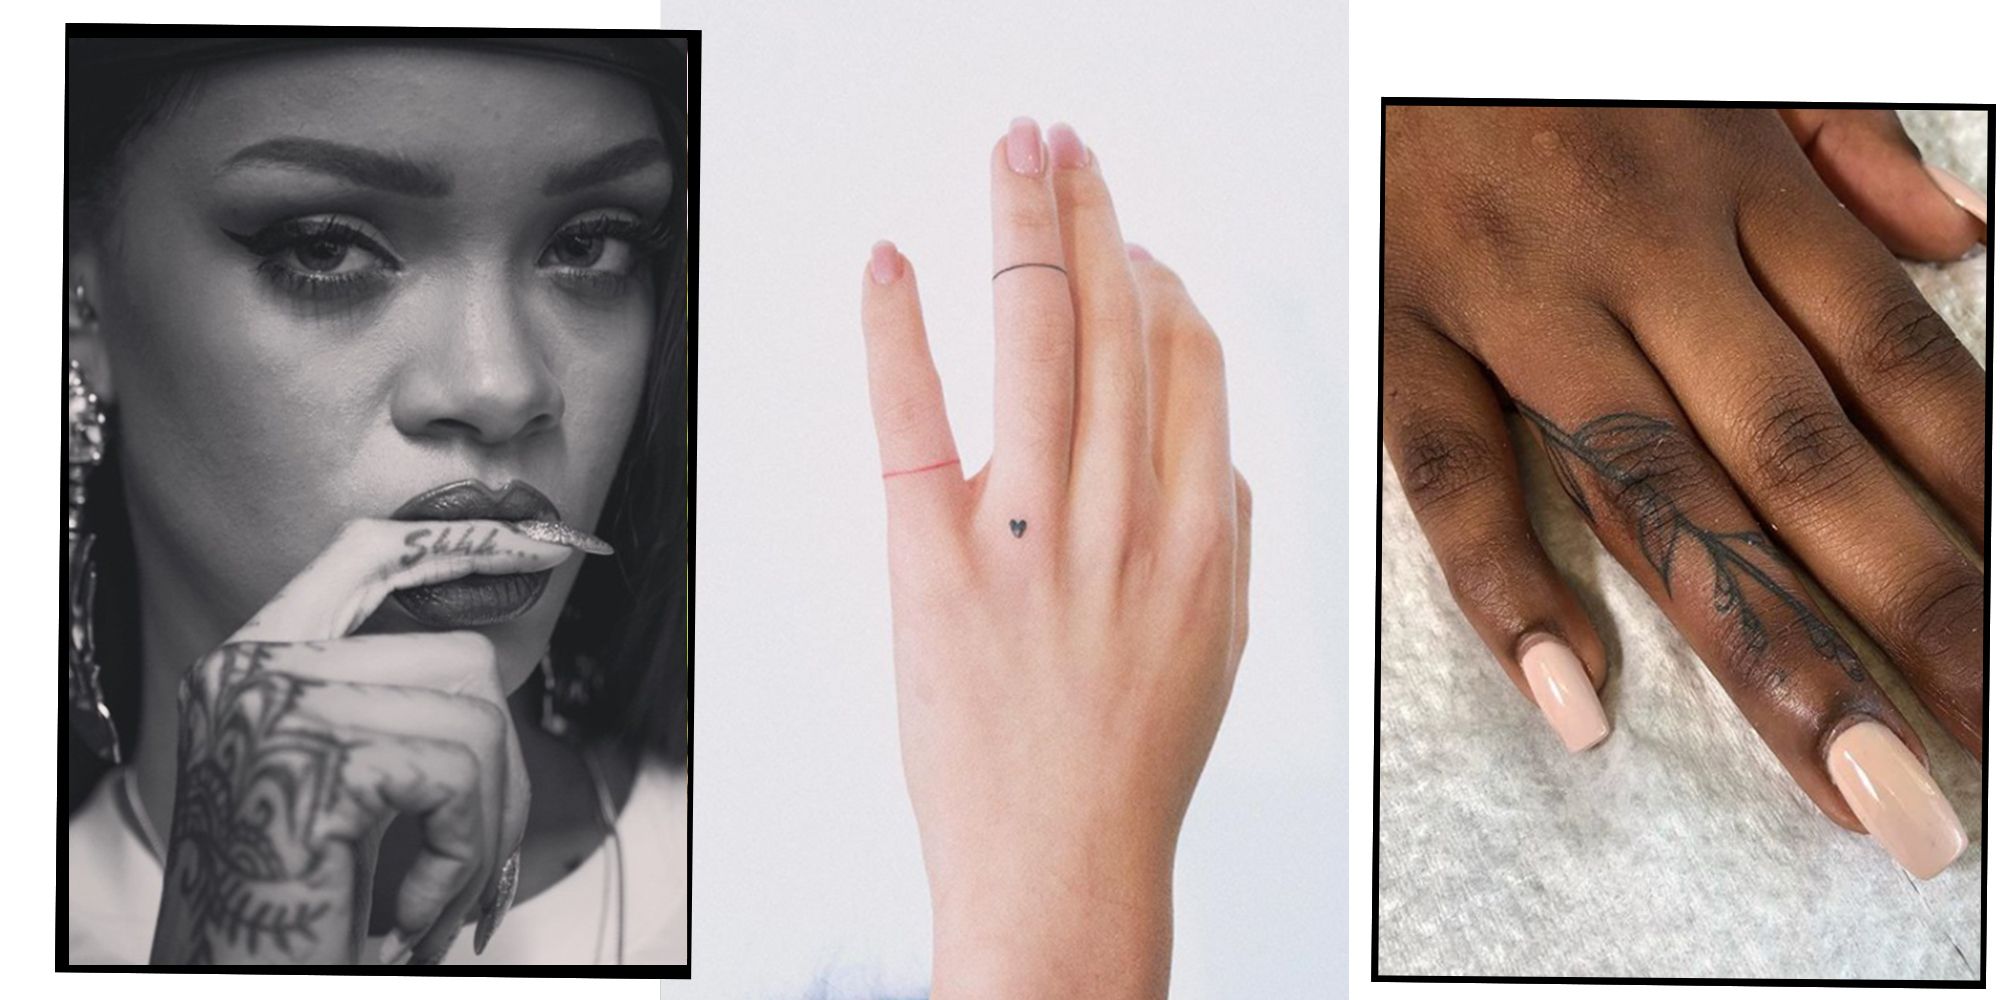 86 Pics Of Celebrity Tattoos To Take To Your Next Tattoo Appt | Bored Panda